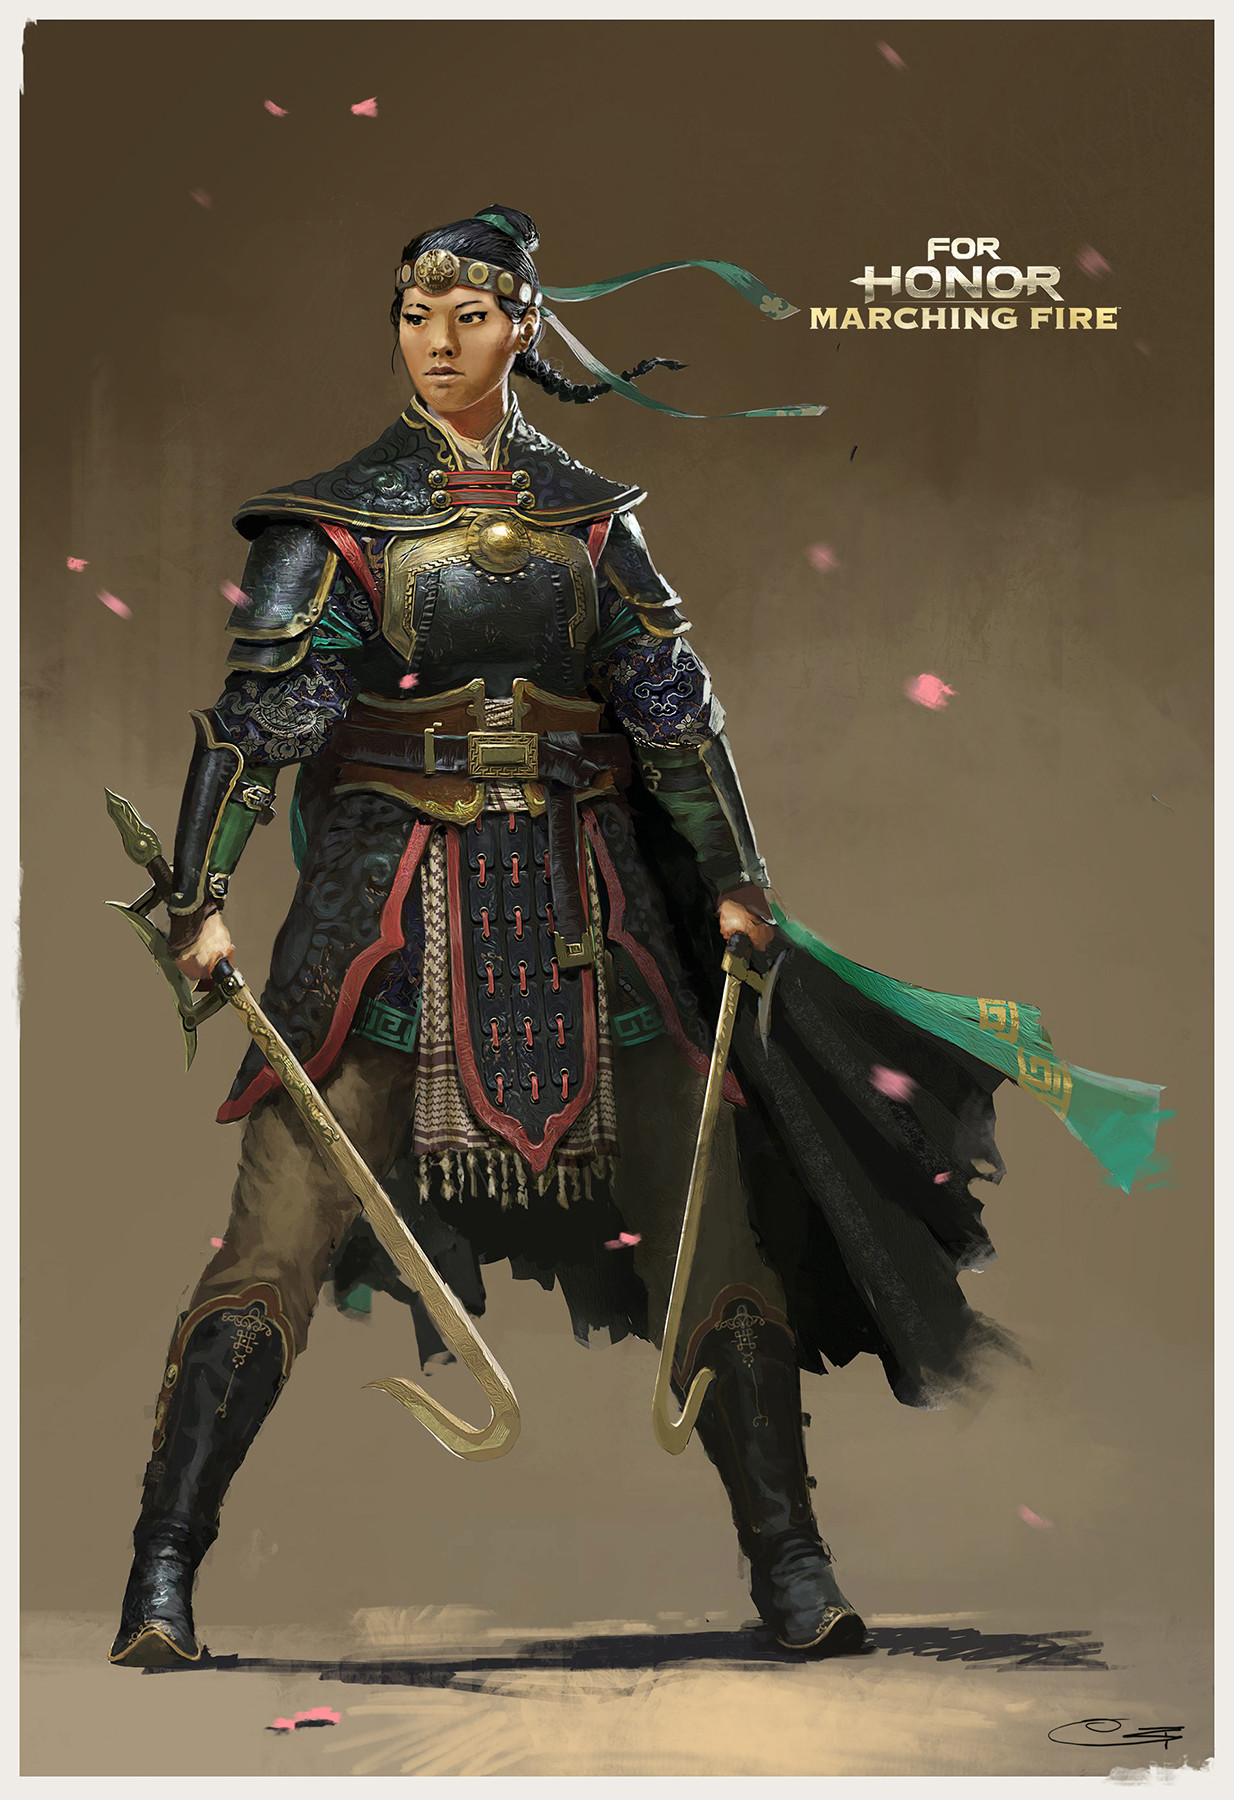 For Honor’s Nuxia by Remko Troost